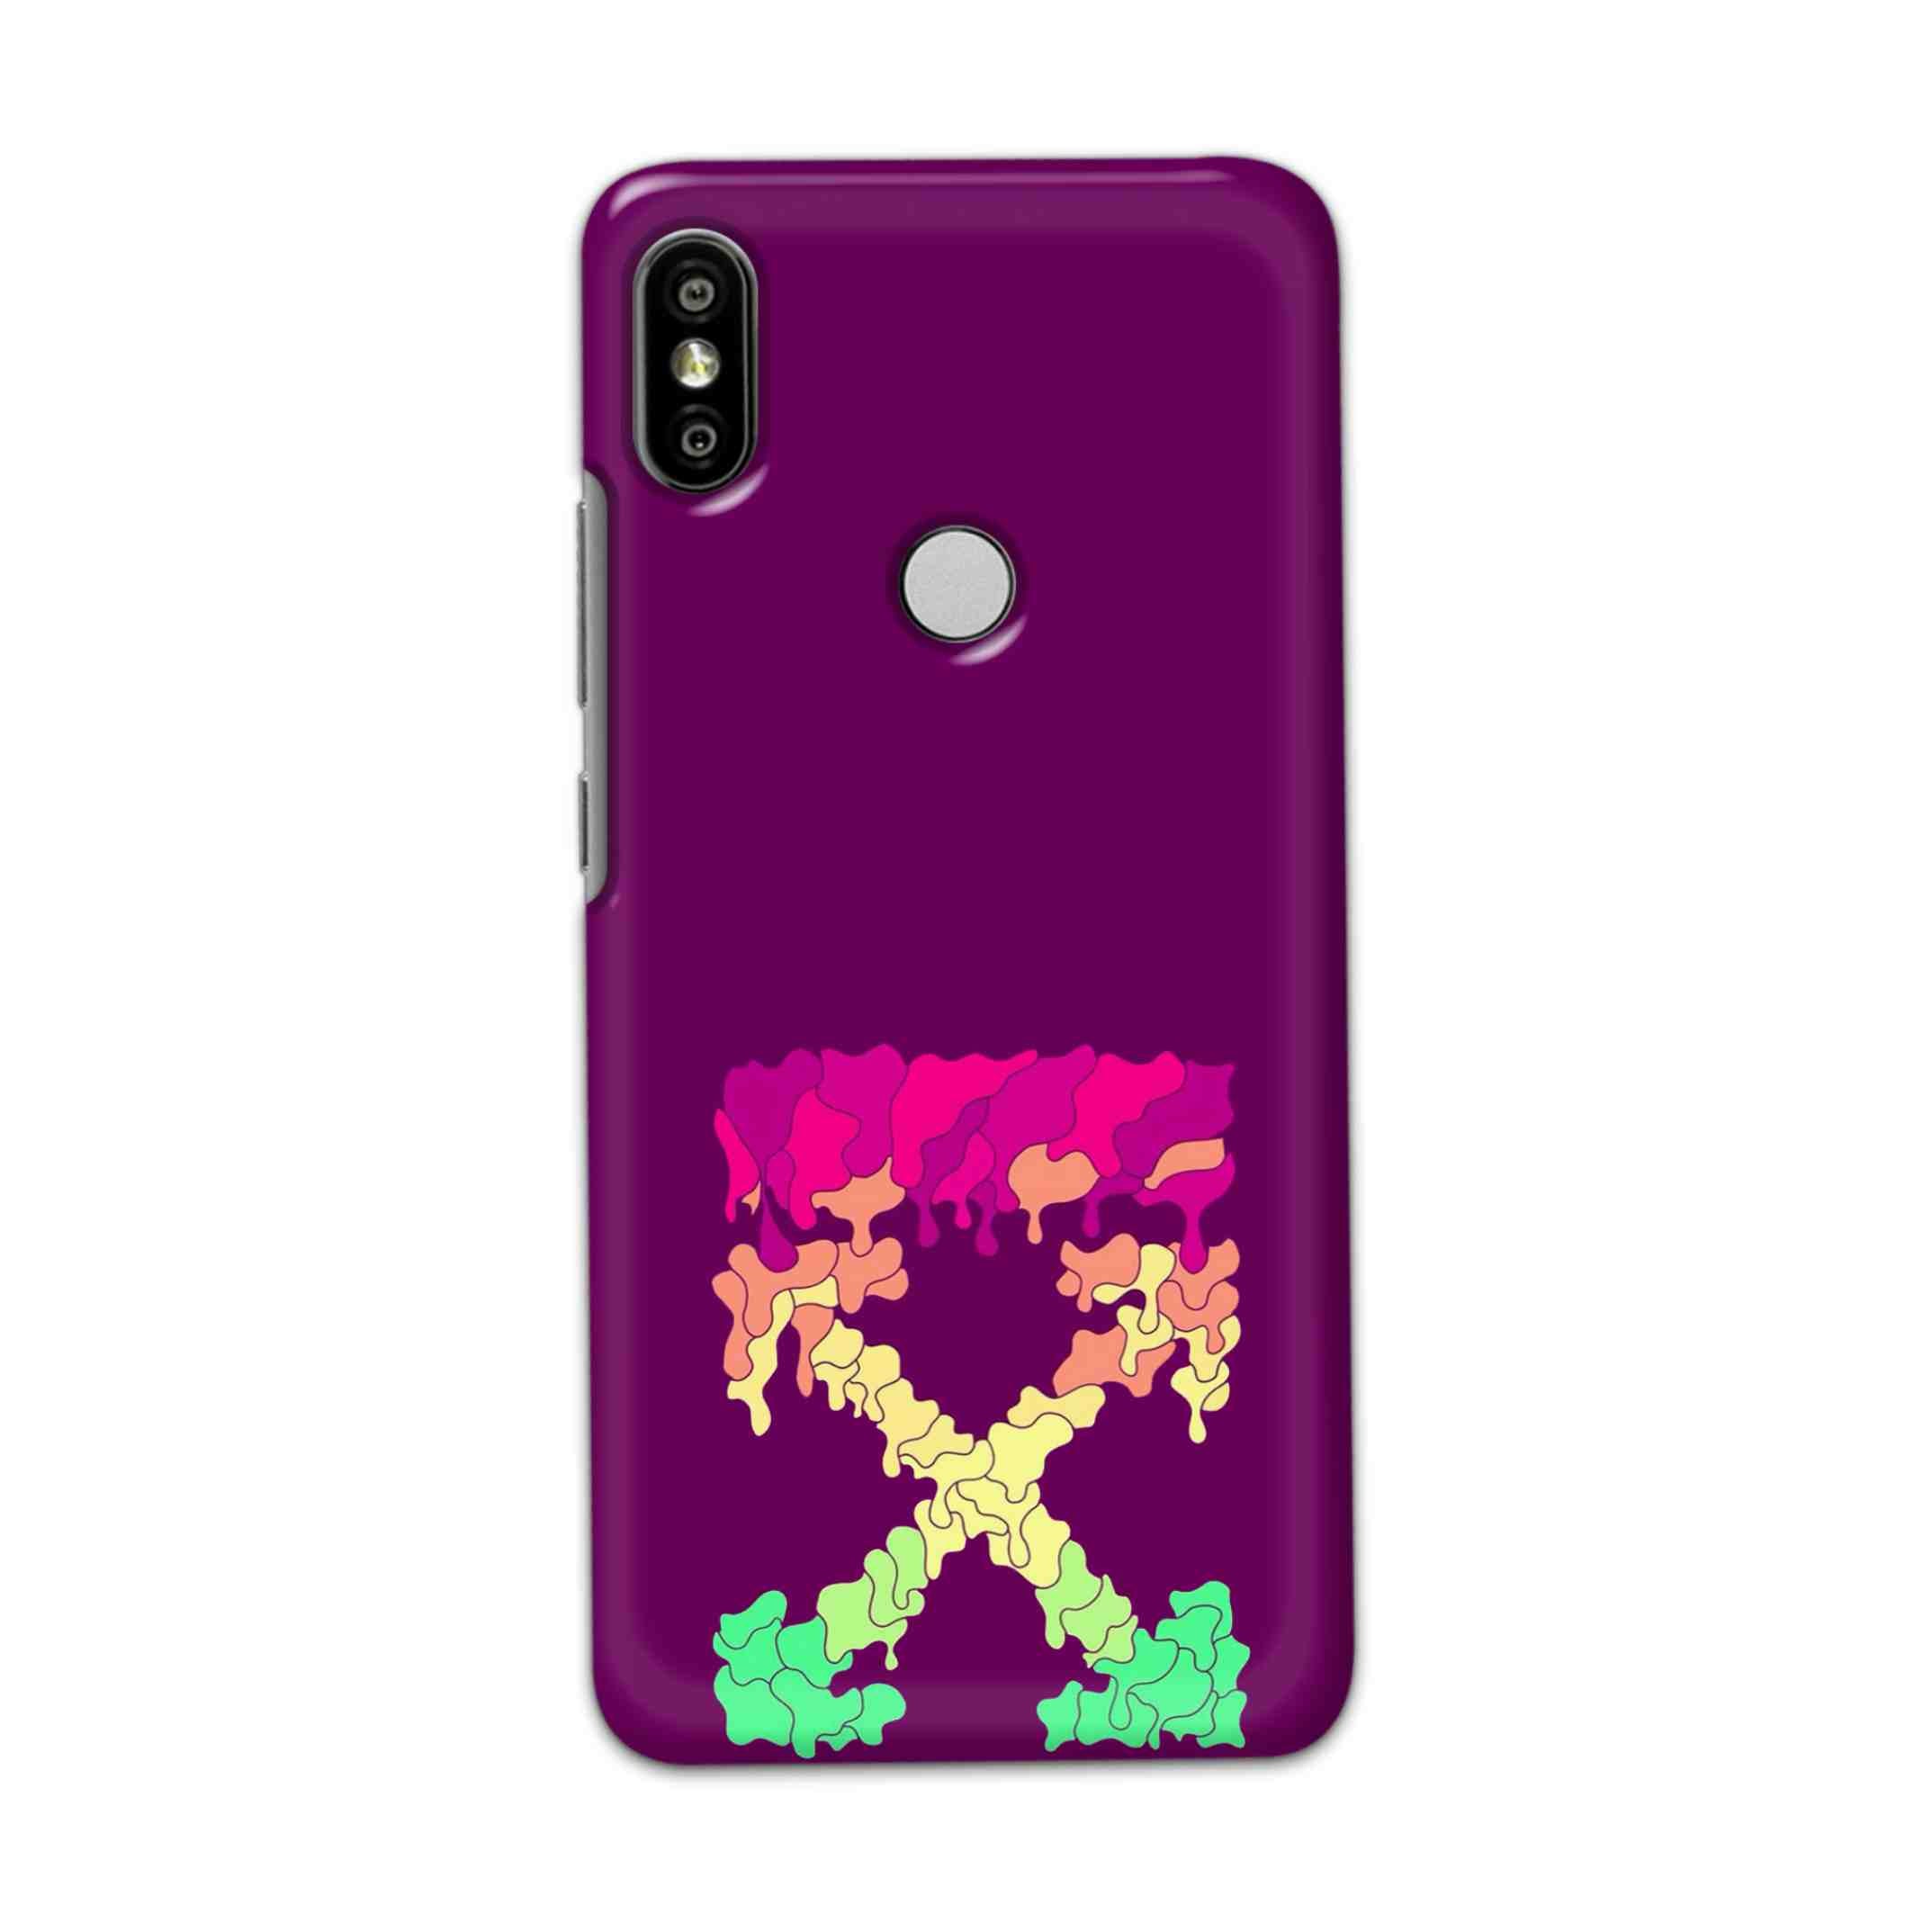 Buy X.O Hard Back Mobile Phone Case Cover For Redmi S2 / Y2 Online